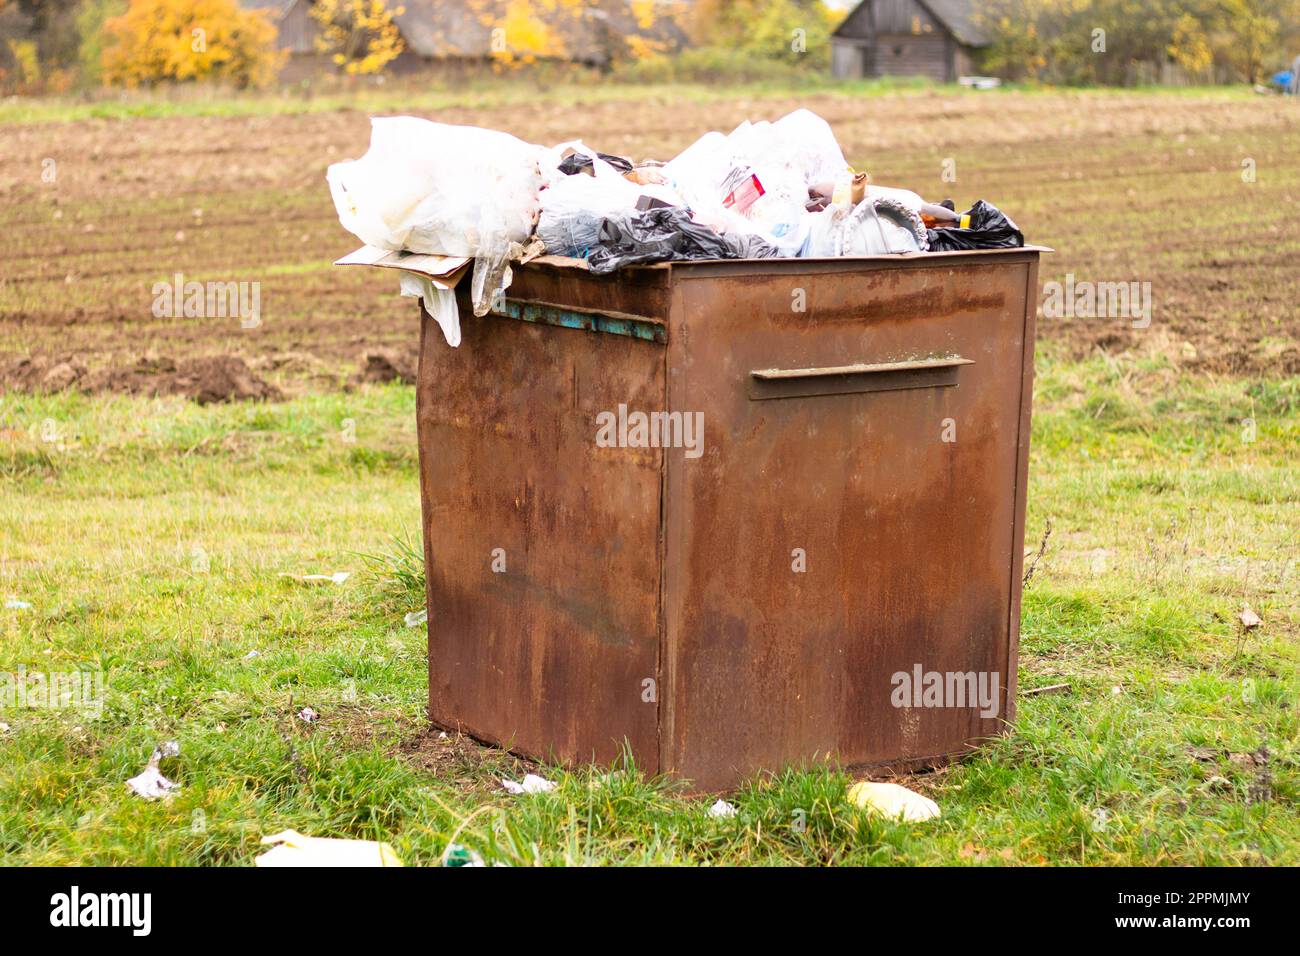 Overflowing rusty trash can in the countryside. Rubbish scattered on the ground, environmental protection problem Stock Photo